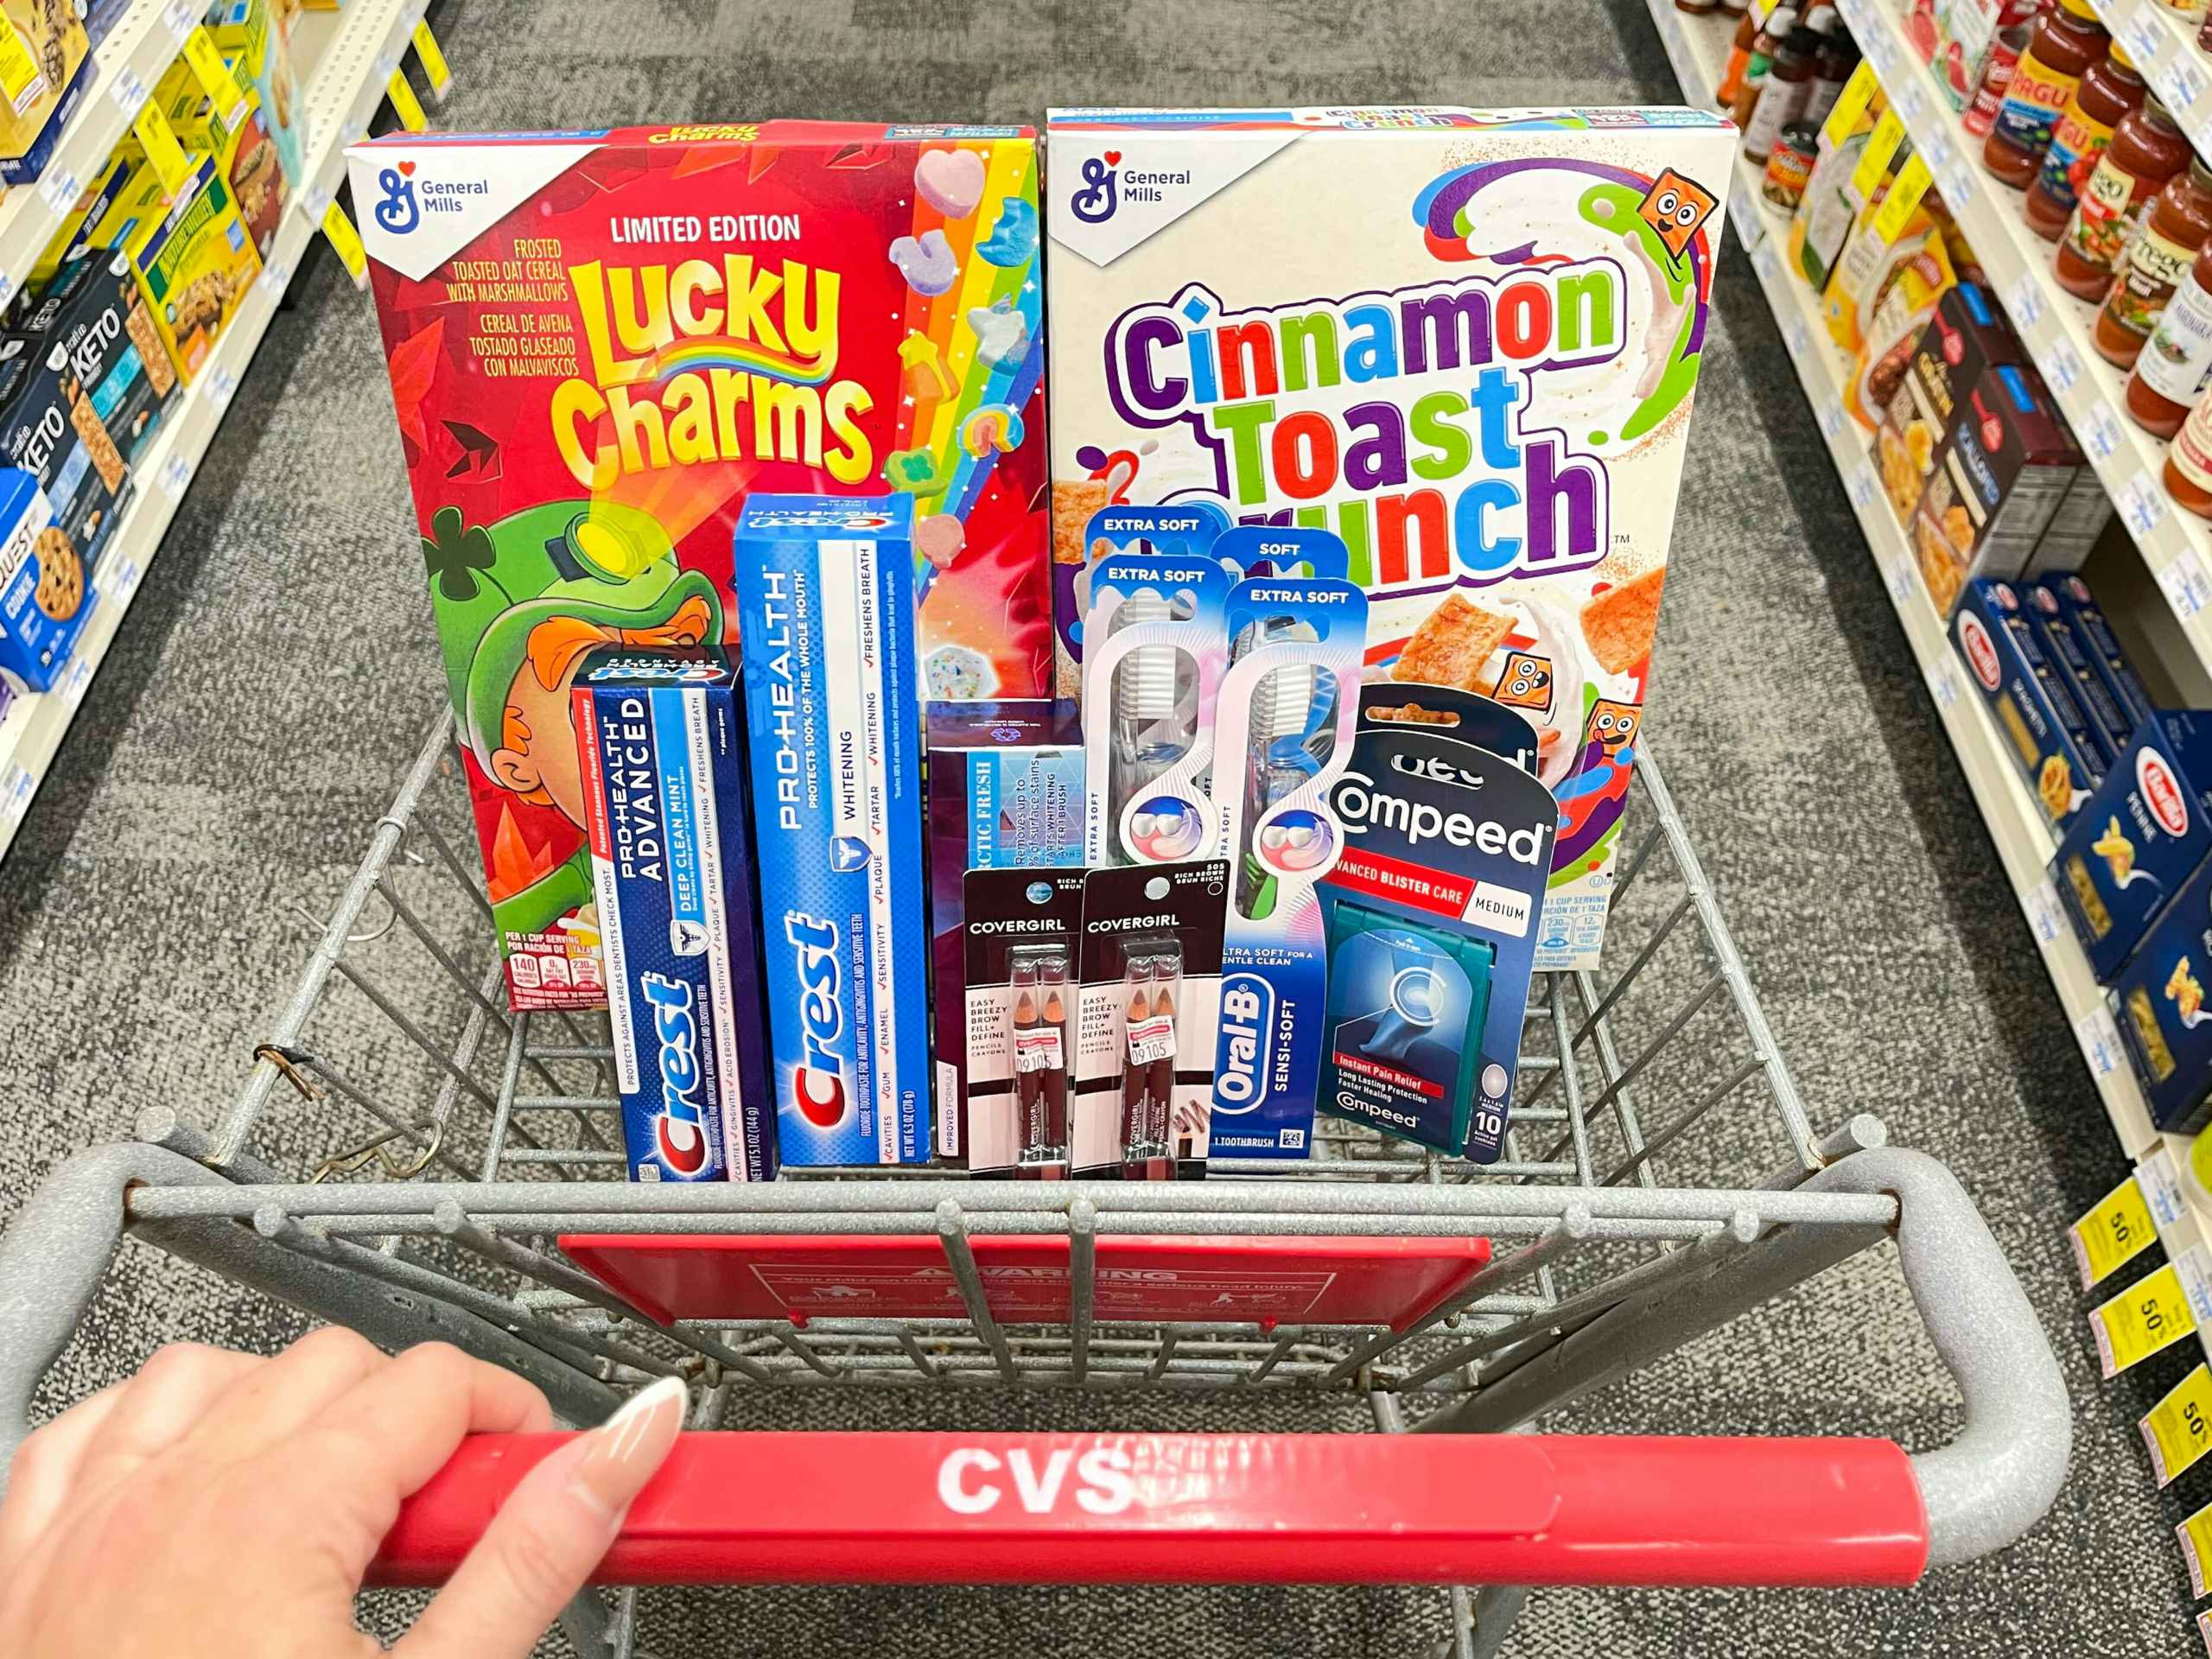 general mills, oral-b, crest, compeed, and covergirl haul in cvs shopping cart